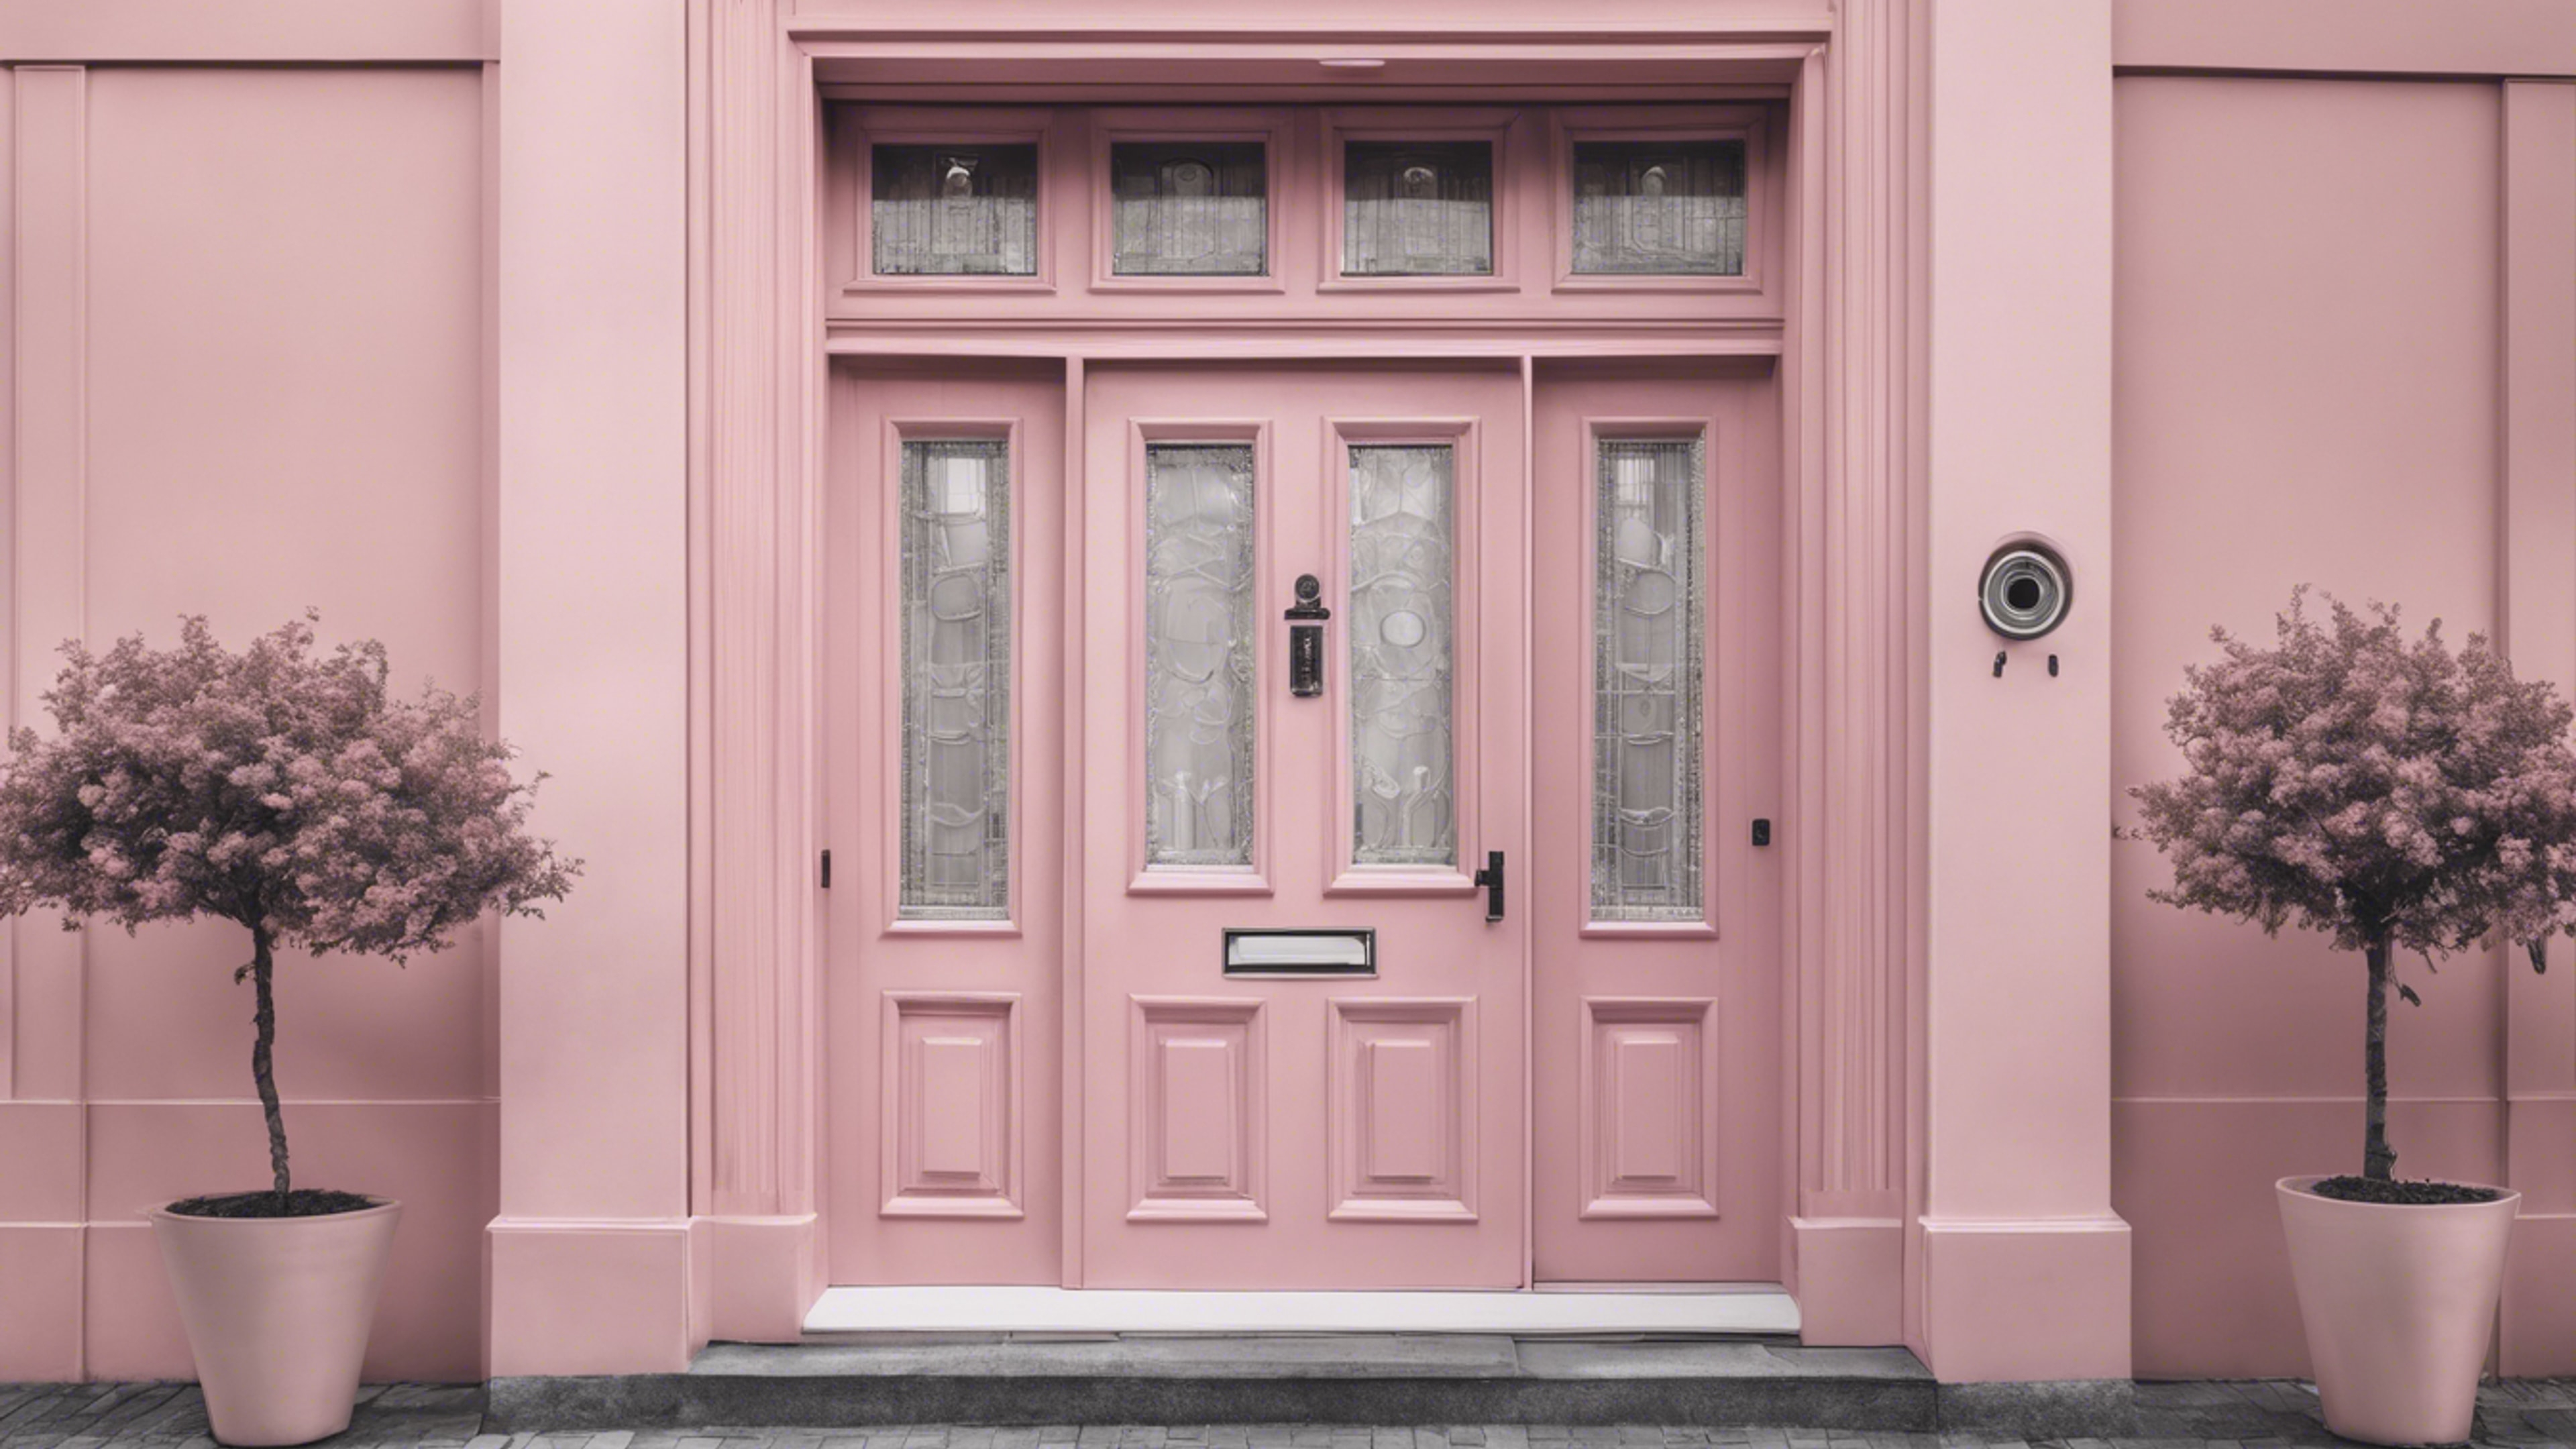 Monochrome image of a sophisticated townhouse door painted in a fetching preppy pastel pink. Ταπετσαρία[a9cdce63c1c94c029691]